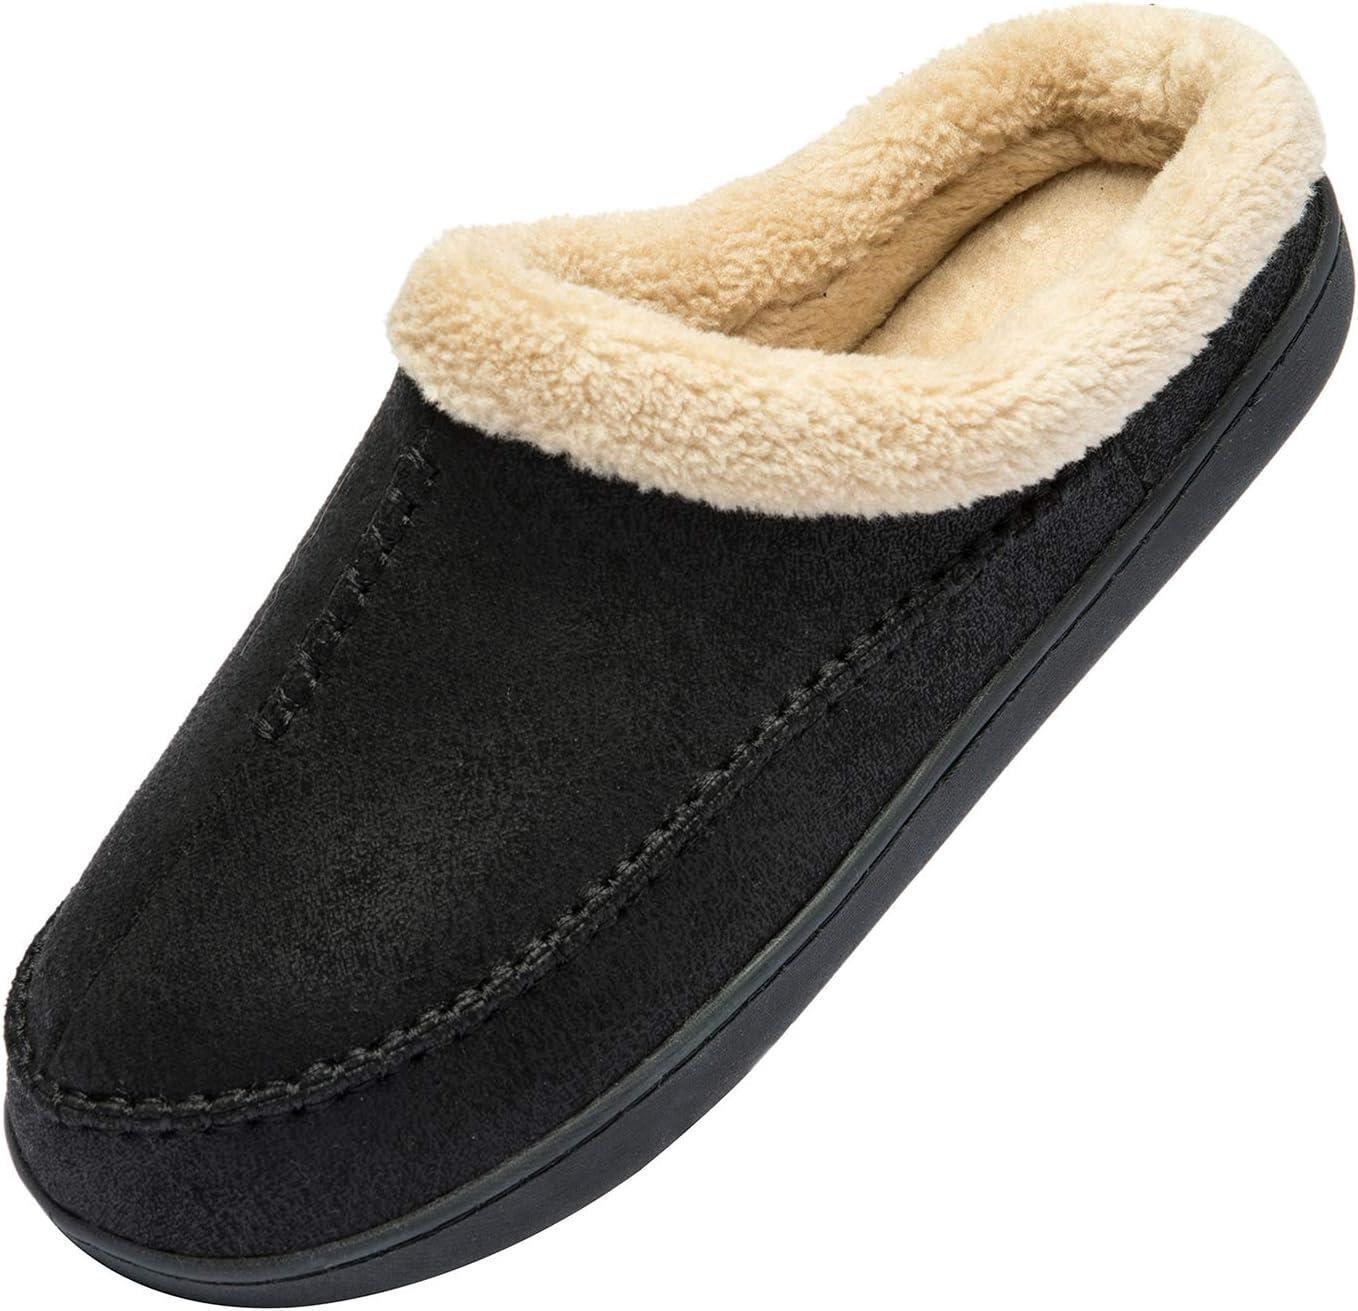 WOTTE Men's Moccasin Slippers